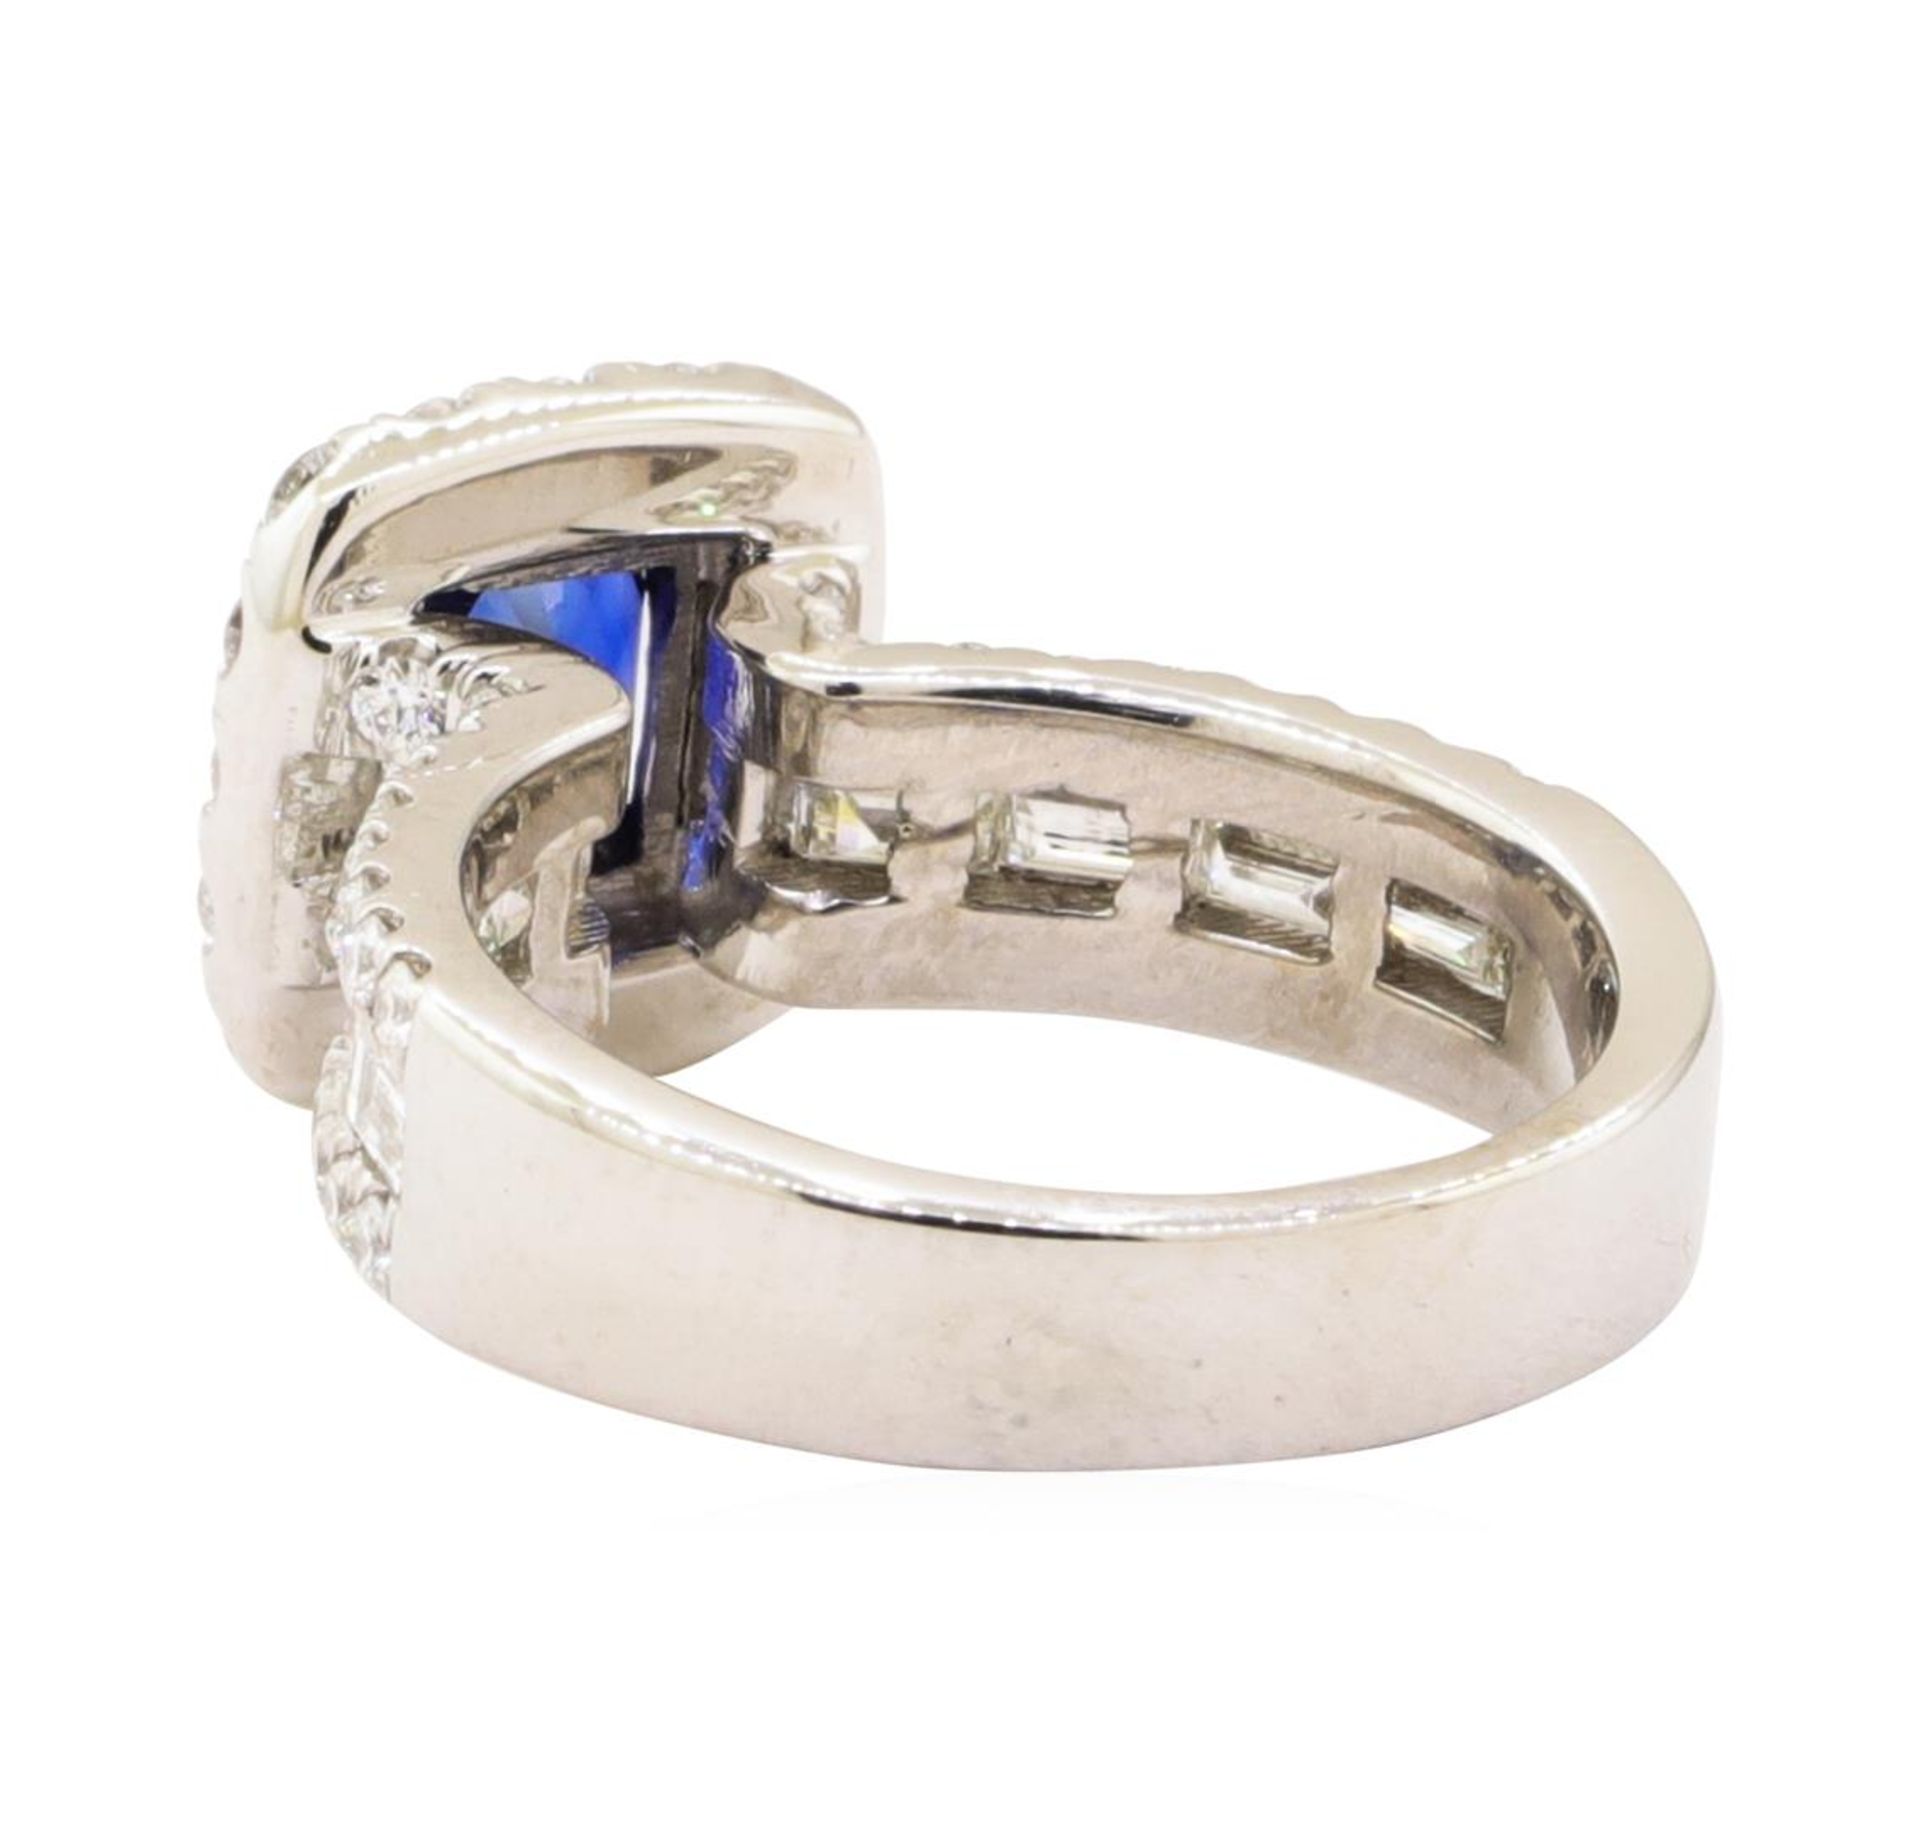 2.79 ctw Blue Sapphire And Diamond Ring - 14KT White Gold - Image 3 of 5